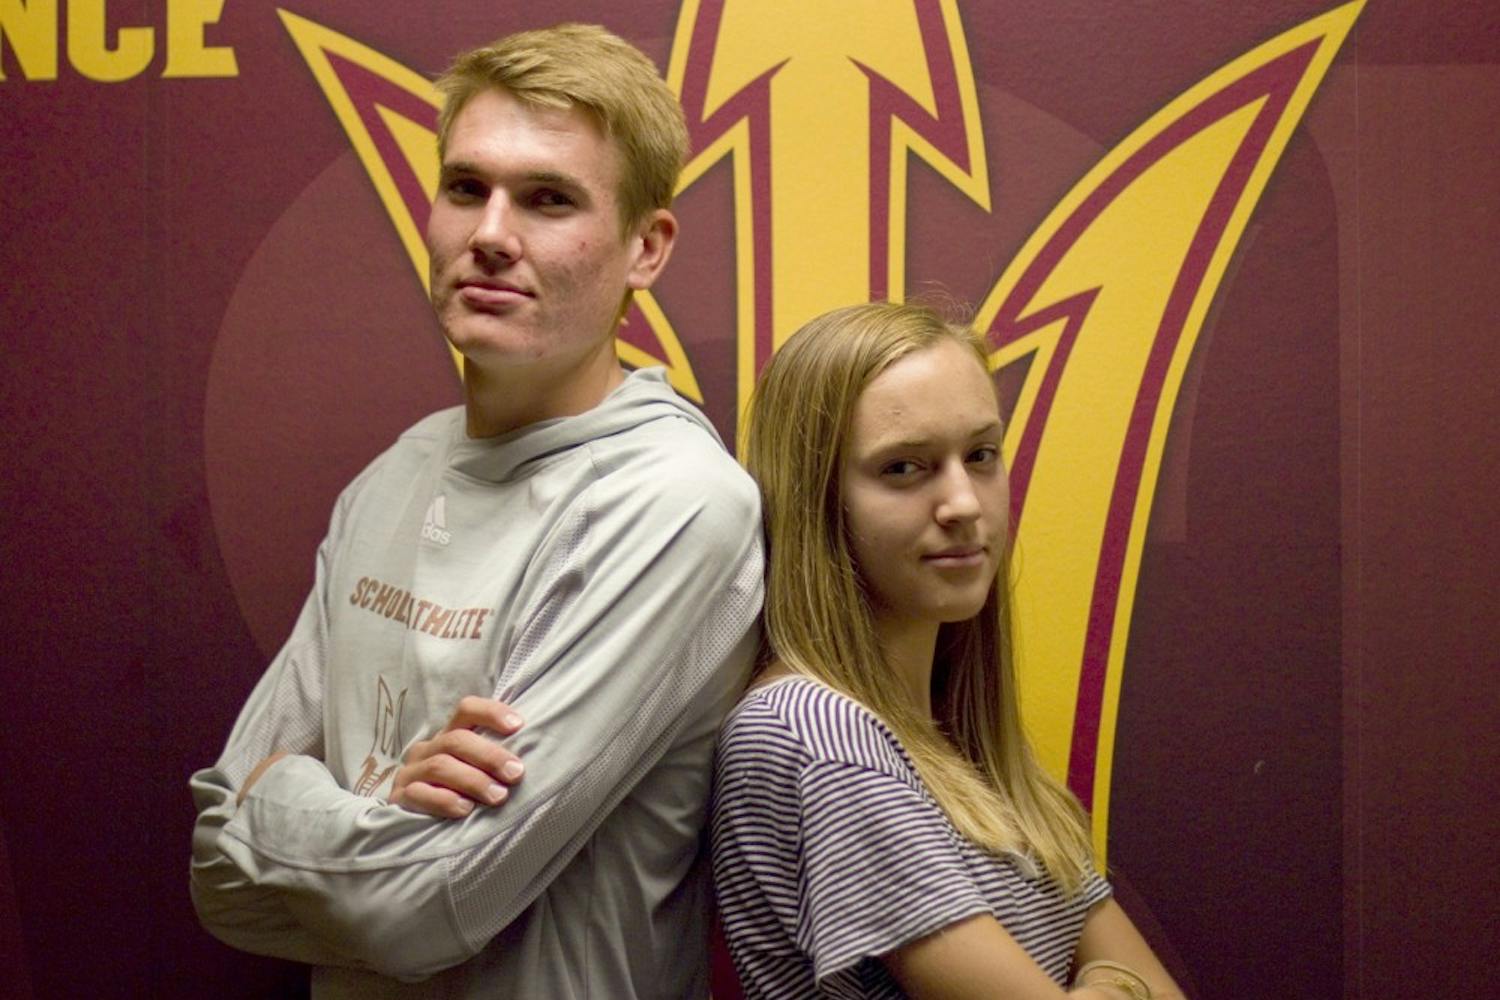 Siblings John Reniewicki, left, a redshirt sophomore, and freshman Megan Reniewicki, right, are cross country runners on the ASU team. The duo posed for a portrait in Nadine and Ed Carson Center in Tempe, Arizona, on Wednesday, Sept. 14, 2016. 